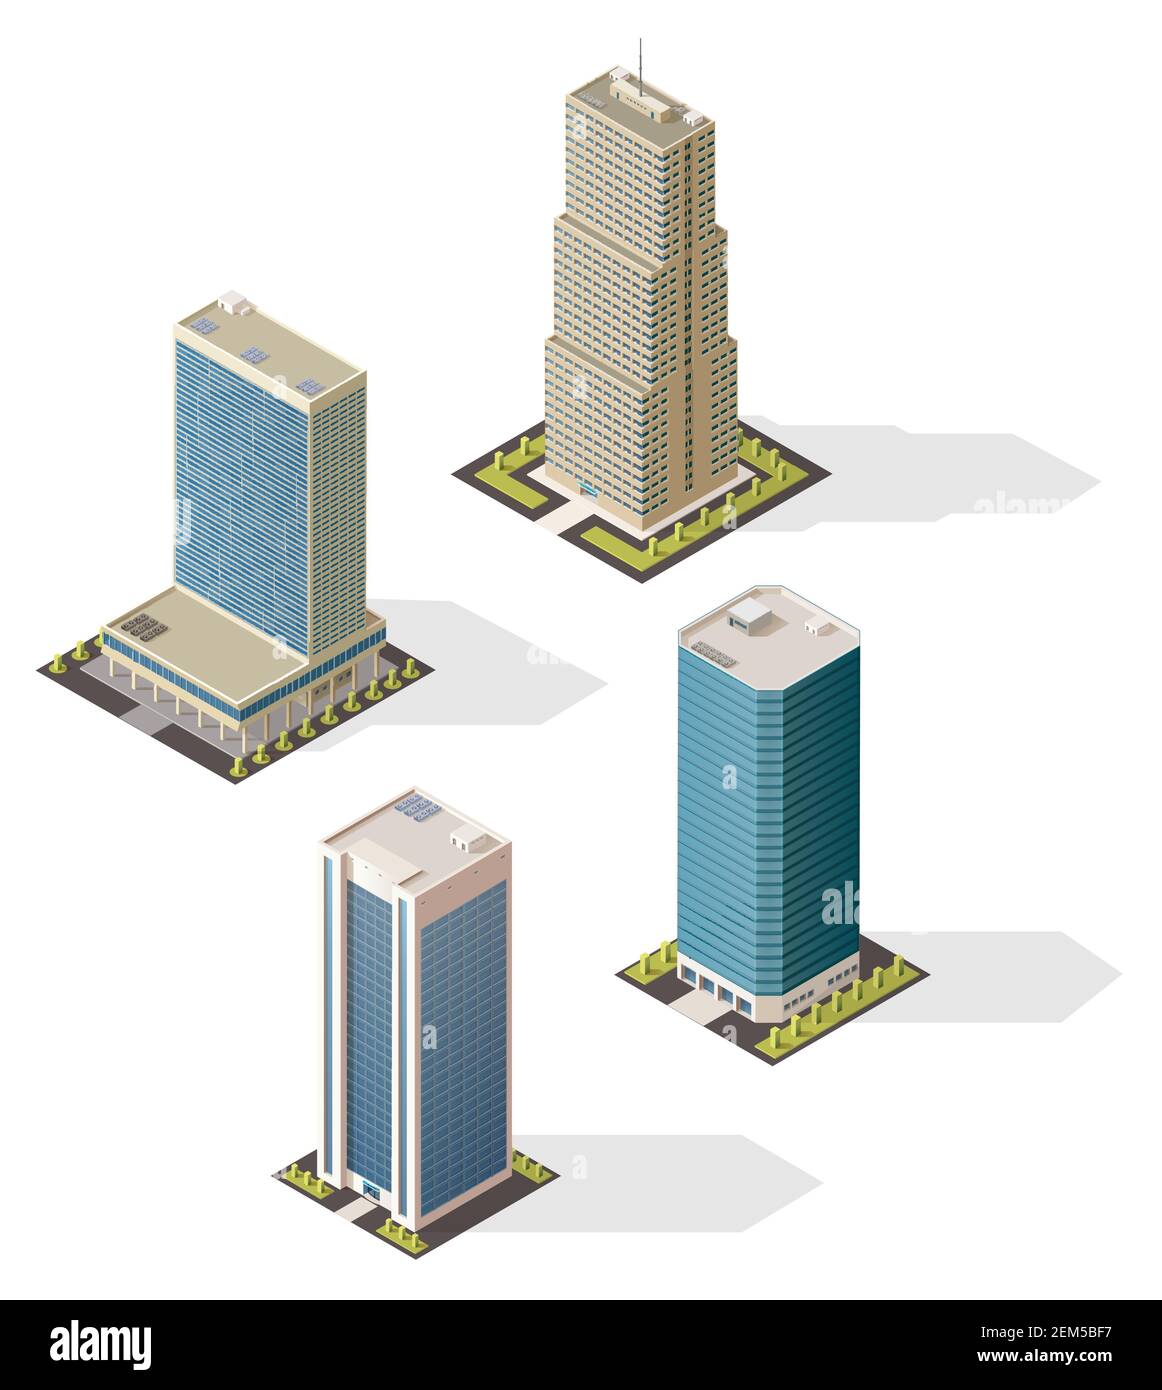 Isometric skyscraper buildings 3d vector icons. Isolated modern city business office centers. Urban tall buildings design of apartment houses, multi s Stock Vector